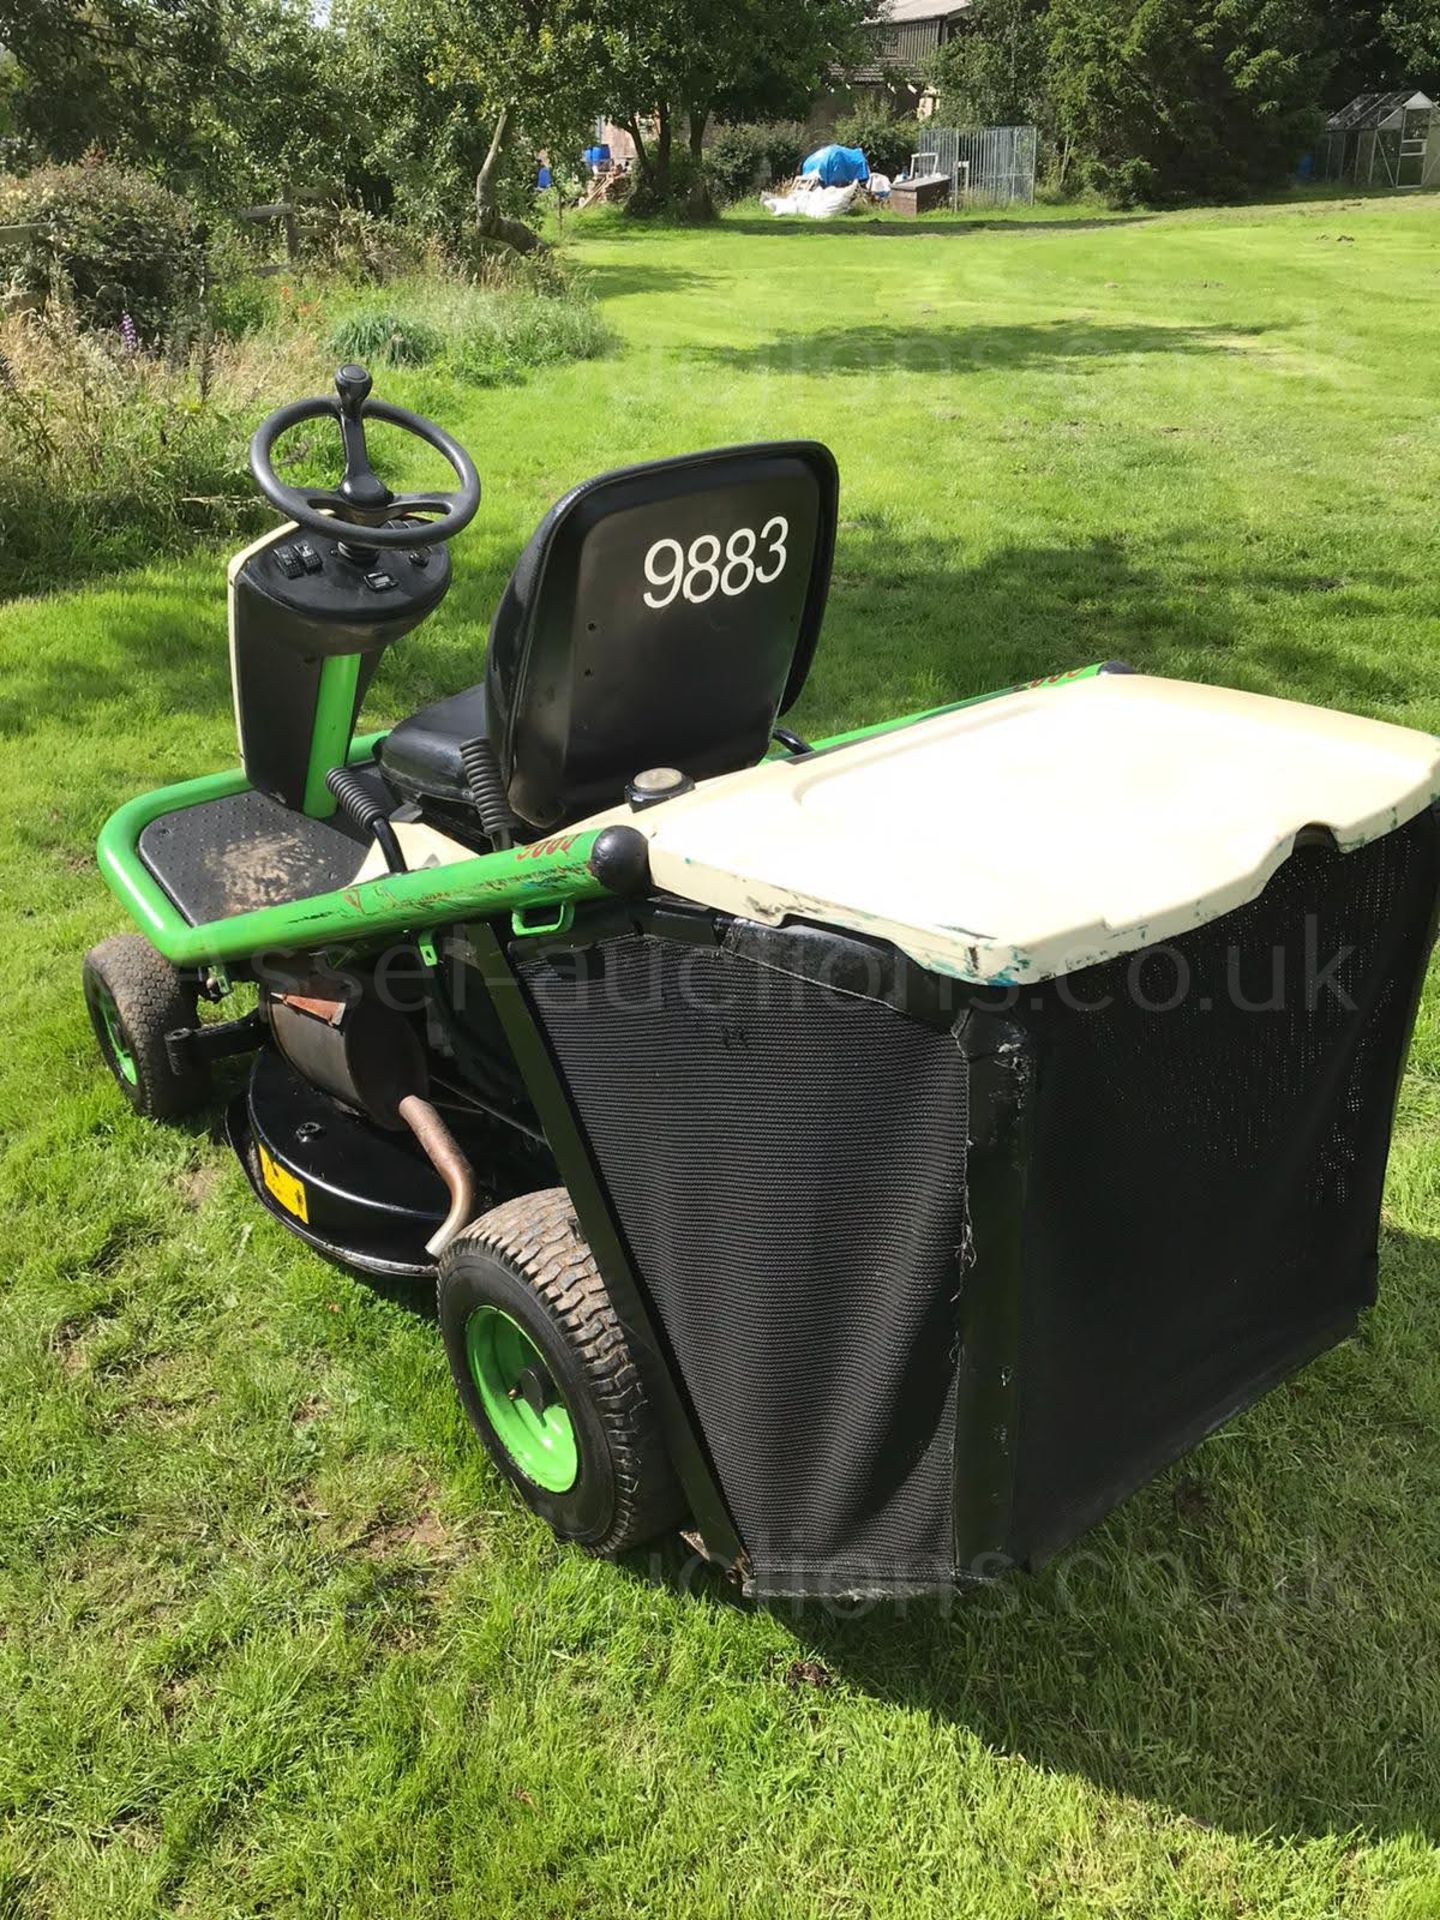 2014 ETESIA HYDRO 80 RIDE ON LAWN MOWER C/W REAR GRASS COLLECTOR, RUNS, DRIVES AND CUTS *PLUS VAT* - Image 4 of 5